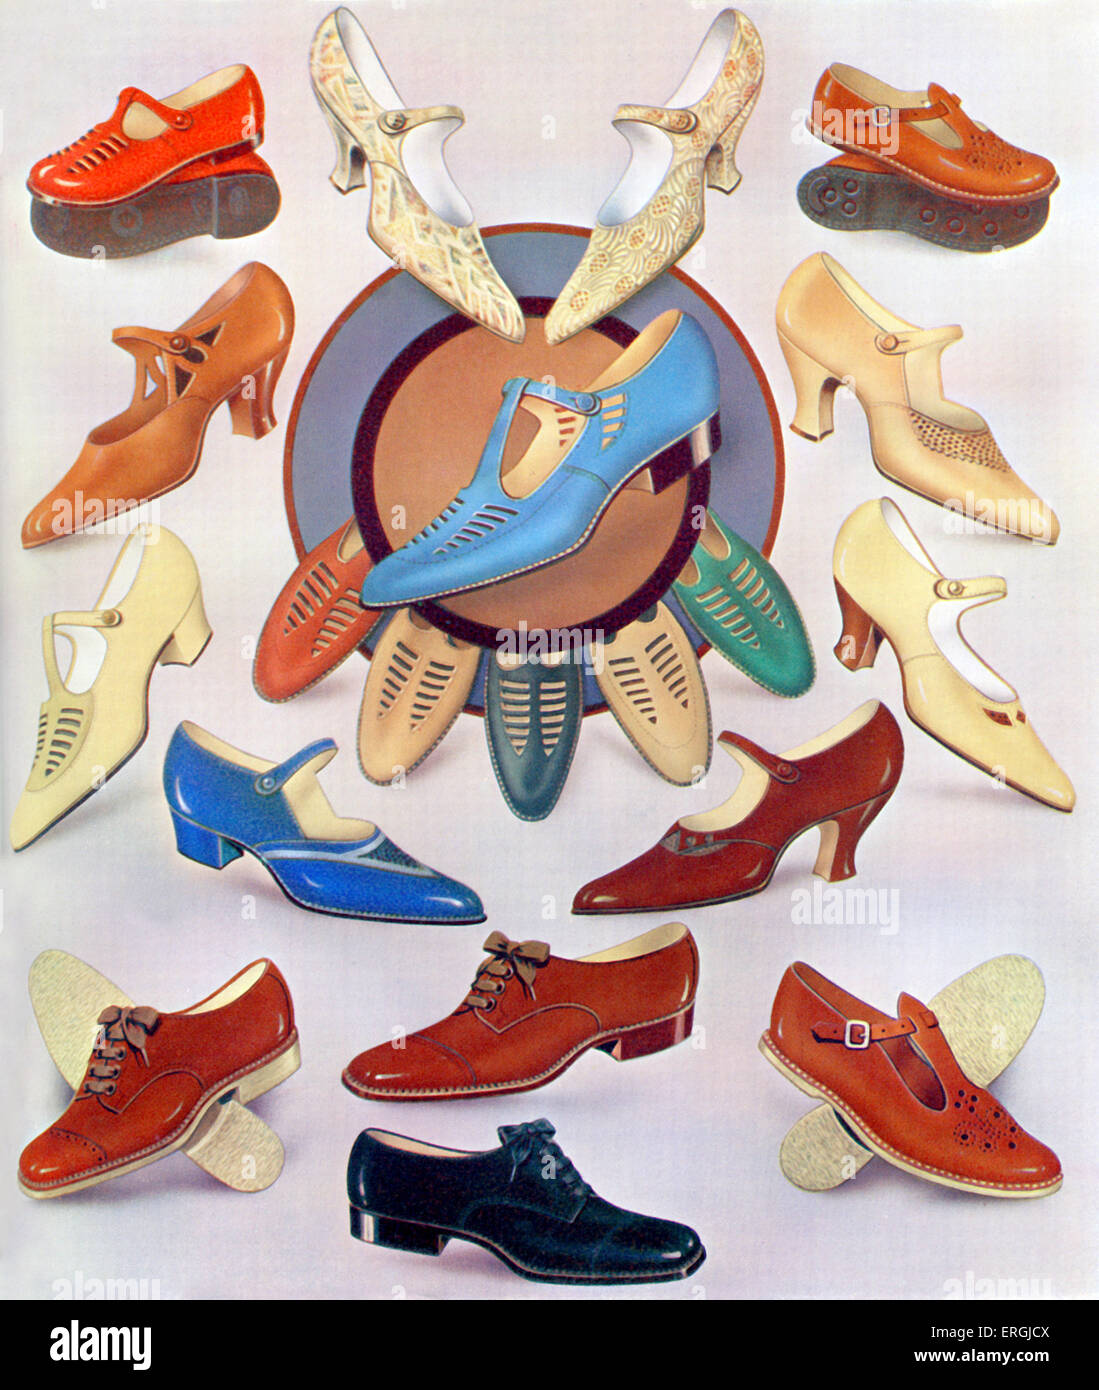 Advertisement for women's shoes, 1930. Artist unknown. Stock Photo